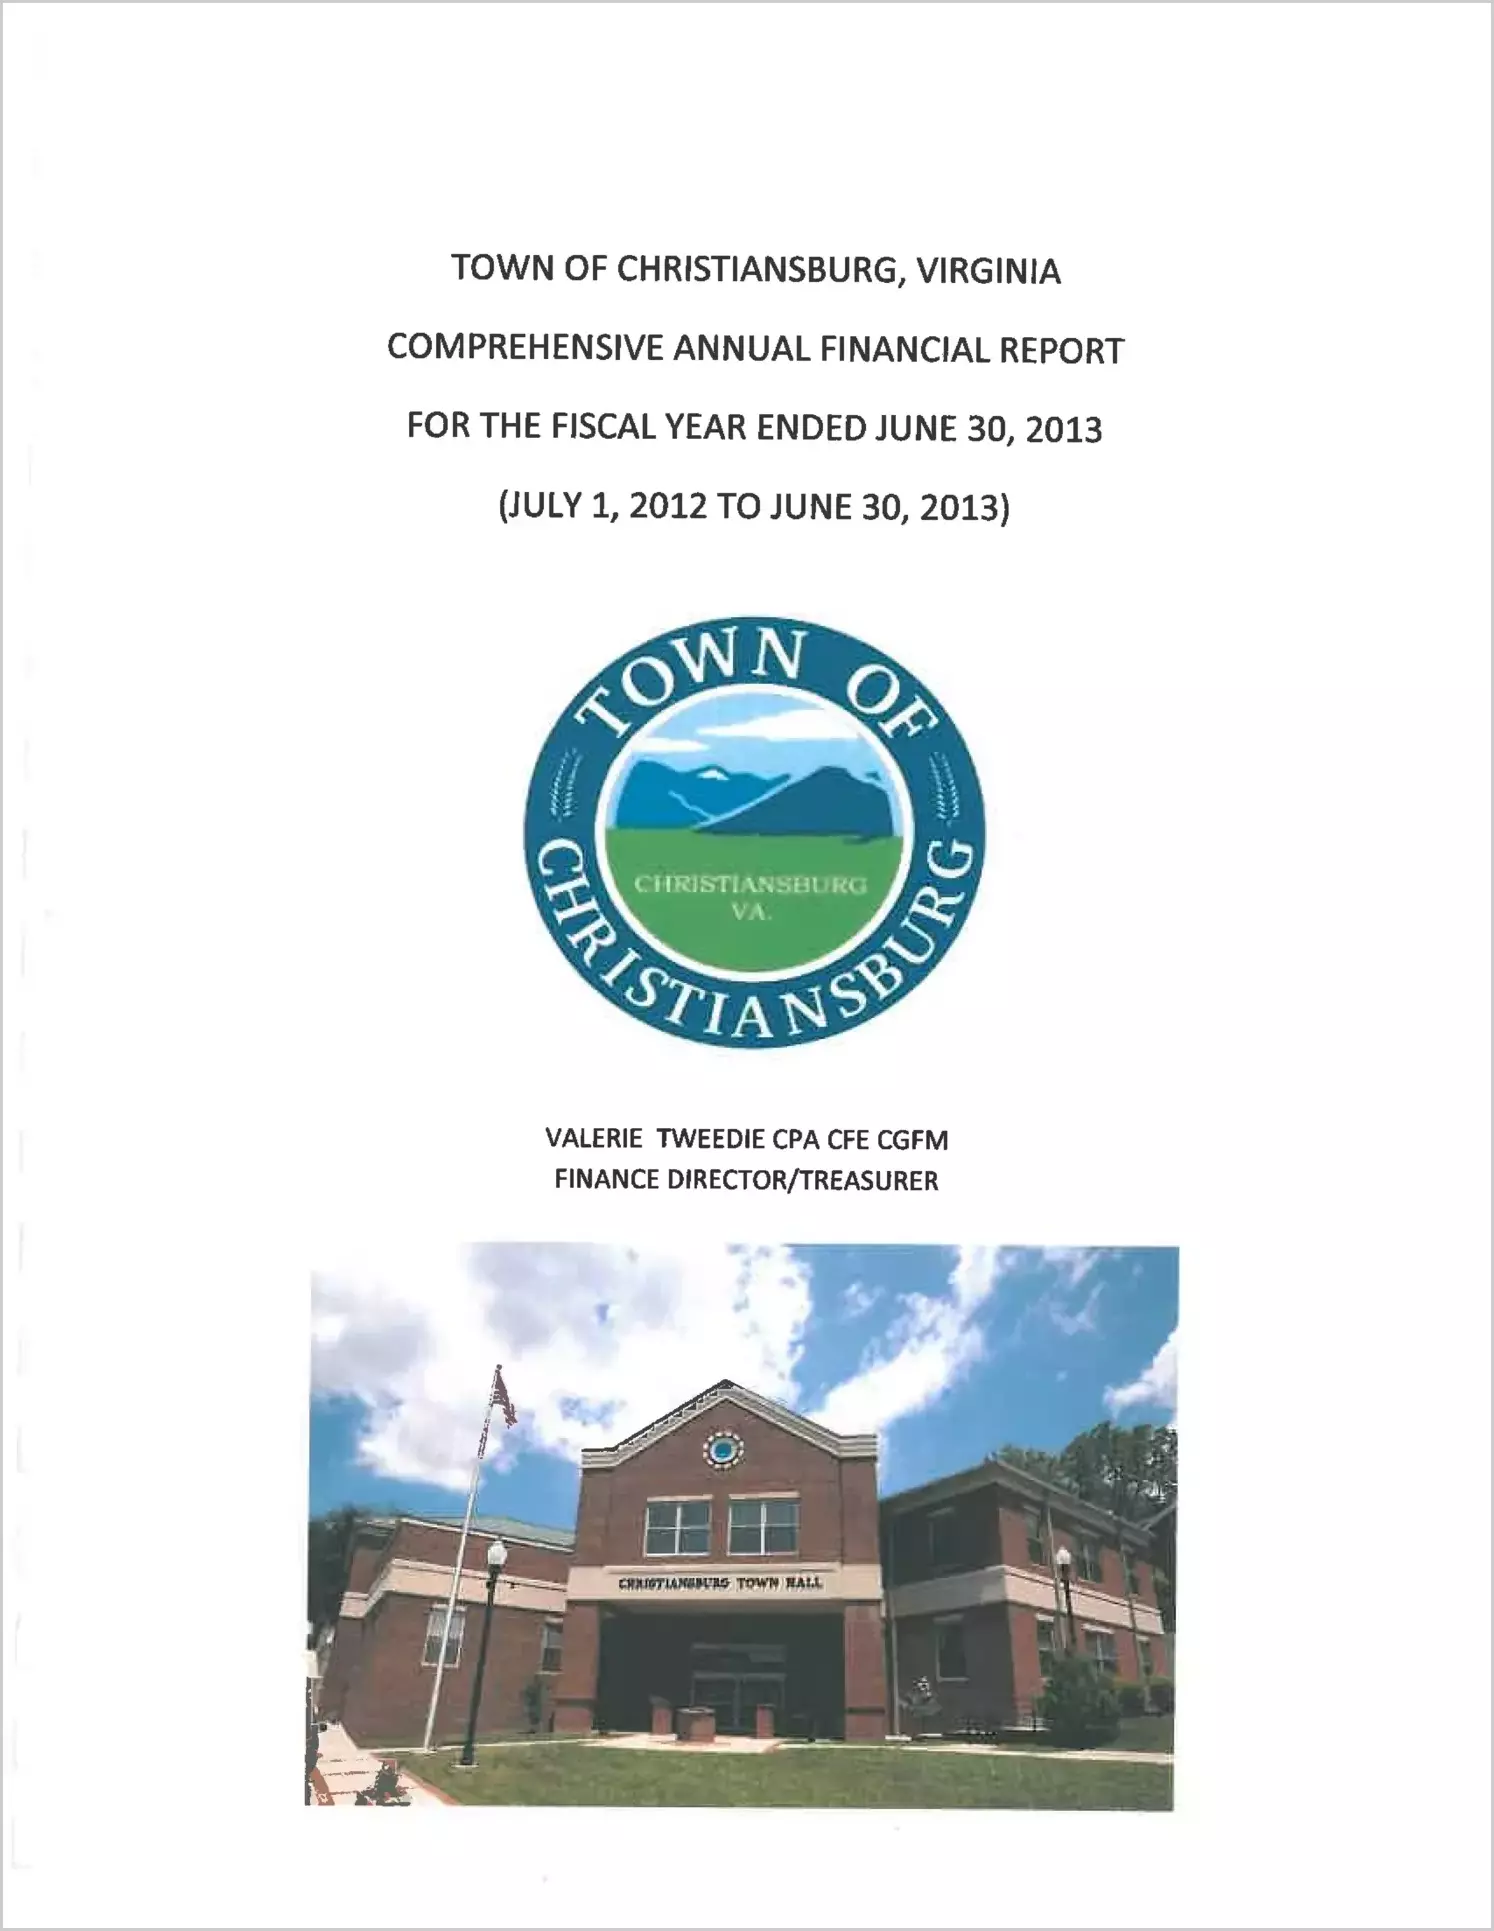 2013 Annual Financial Report for Town of Christiansburg